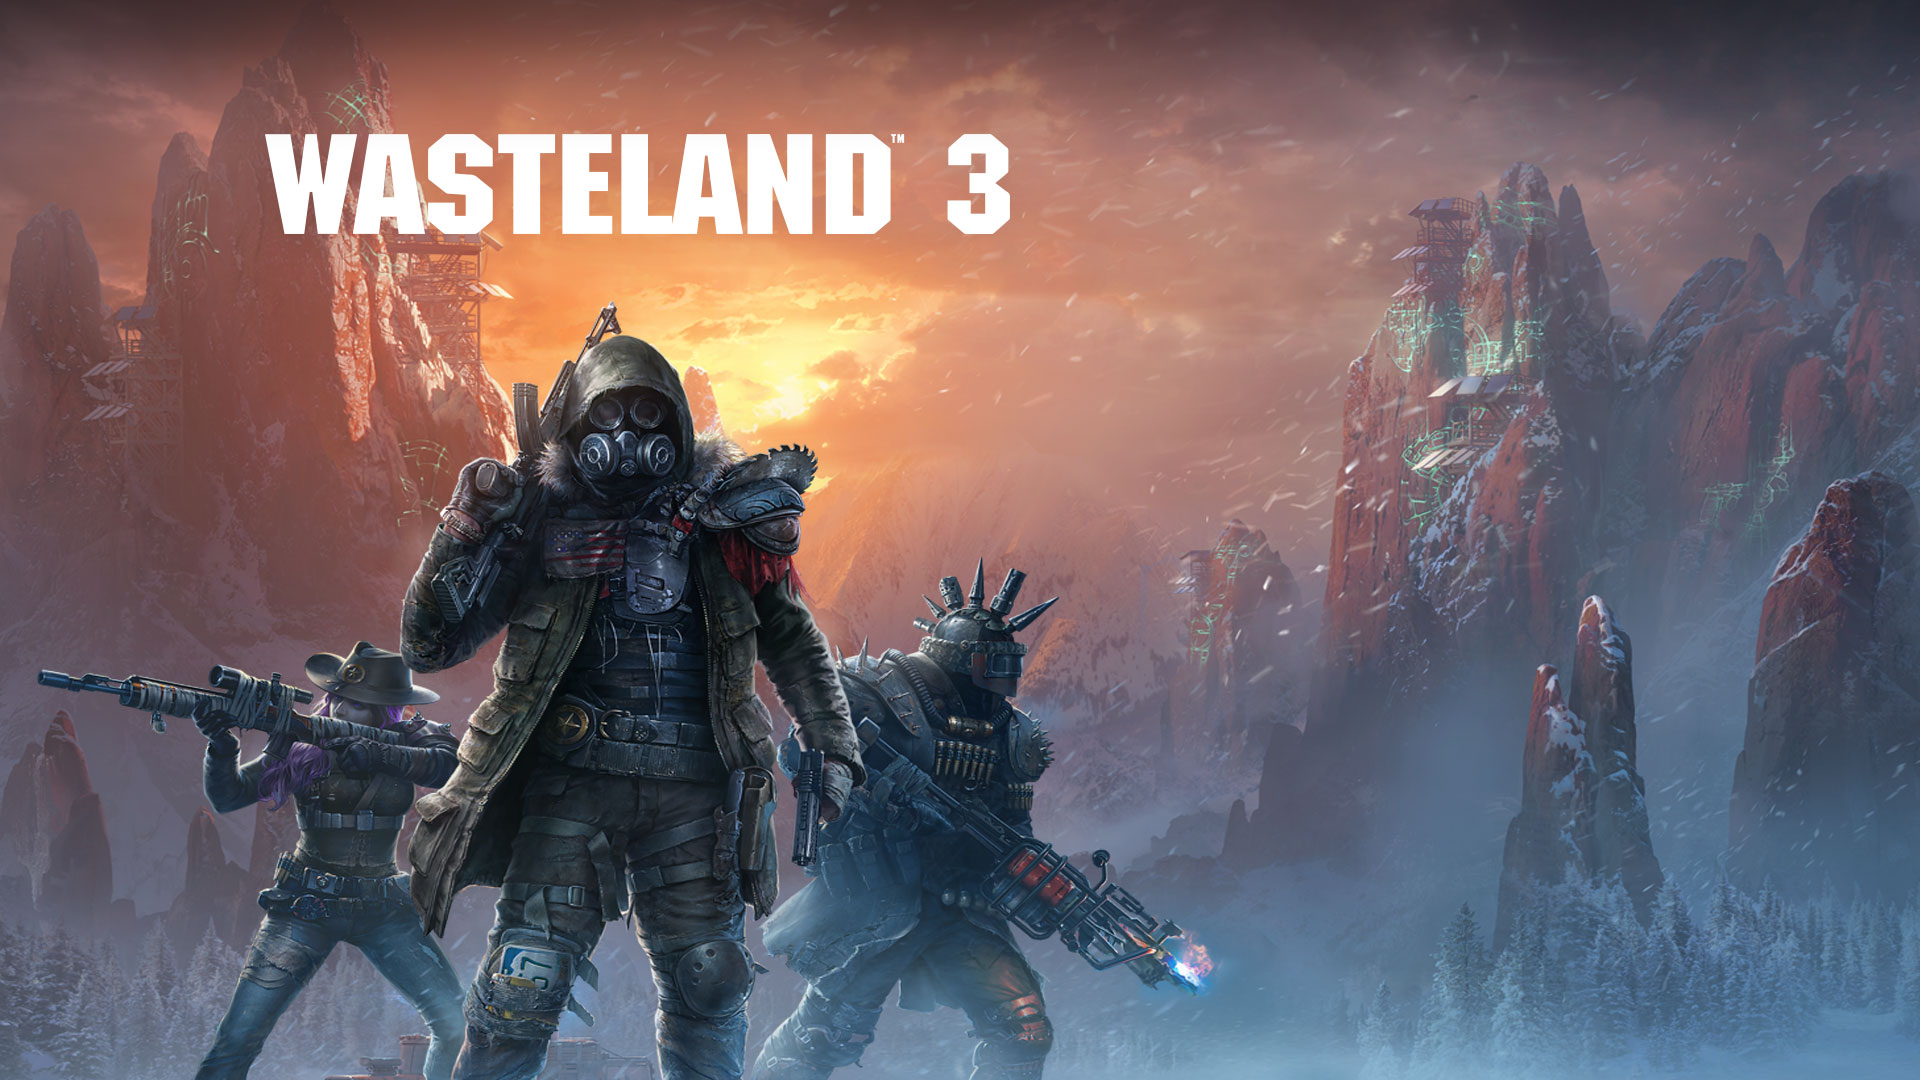 Wasteland Wasteland 3 Wasteland Game Video Games Games Posters 1920x1080